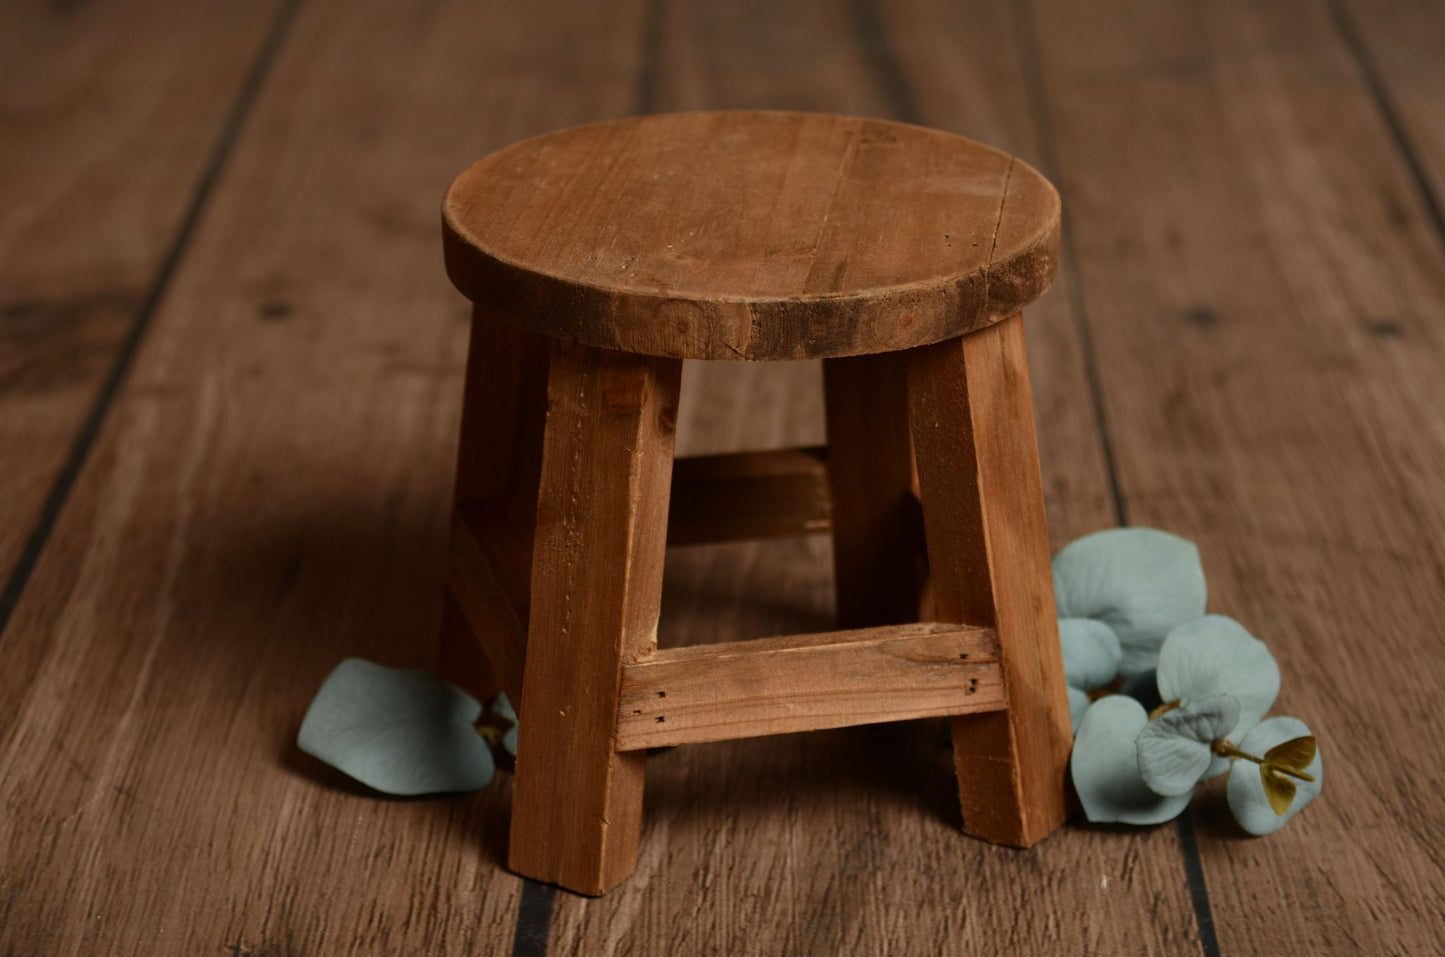 Rustic Round End Table - Brown